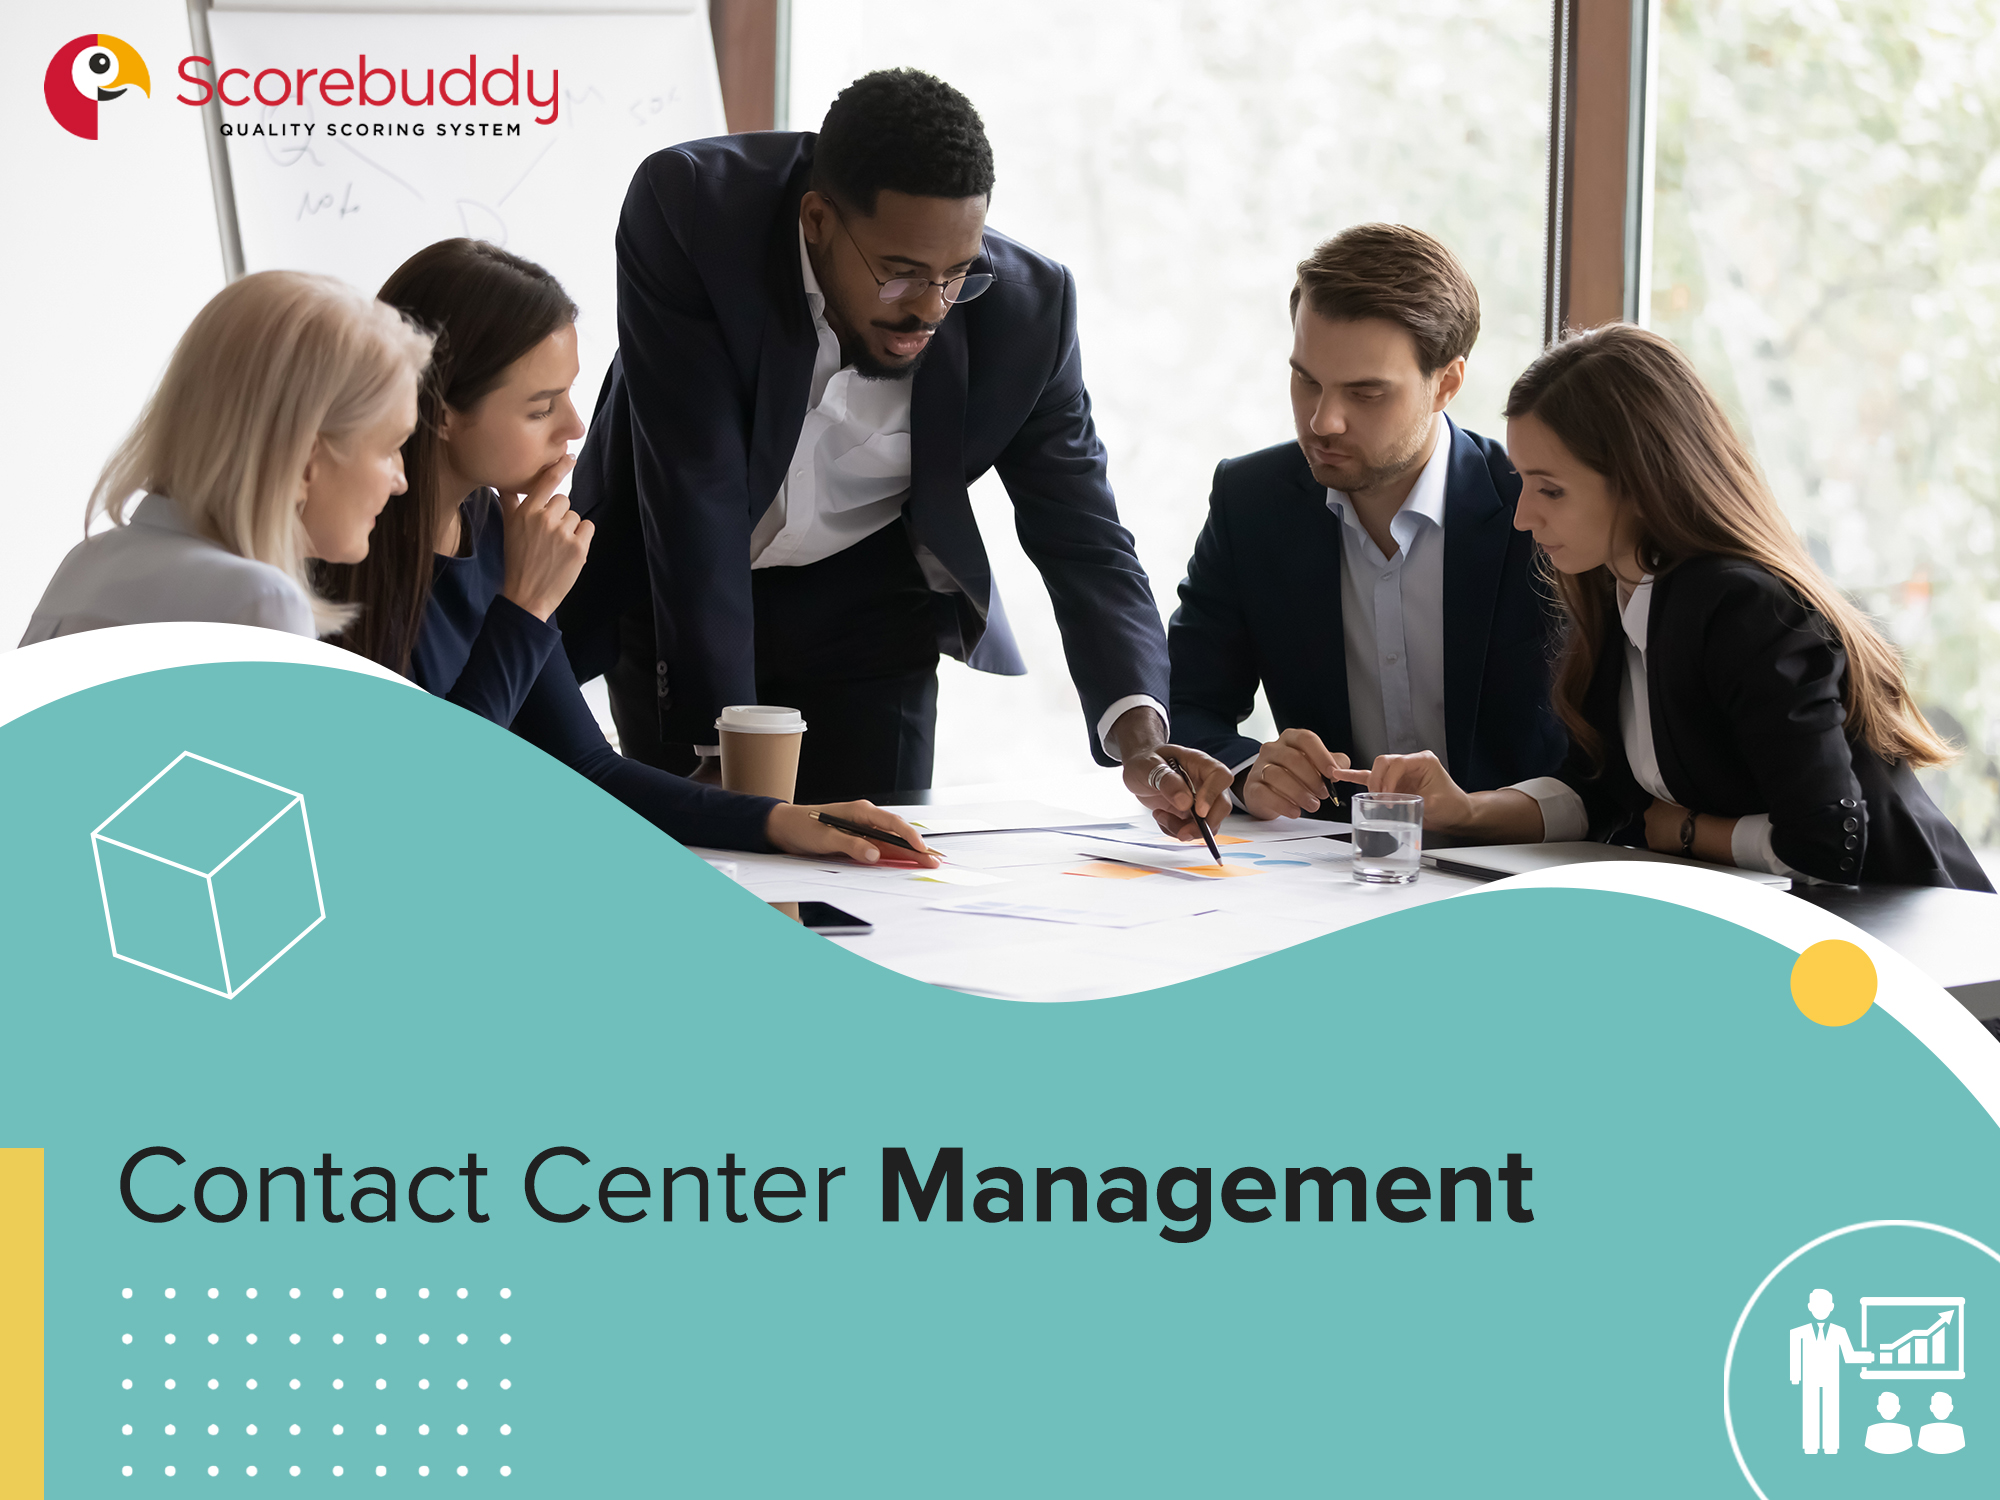 A Complete Guide on Contact Center Management